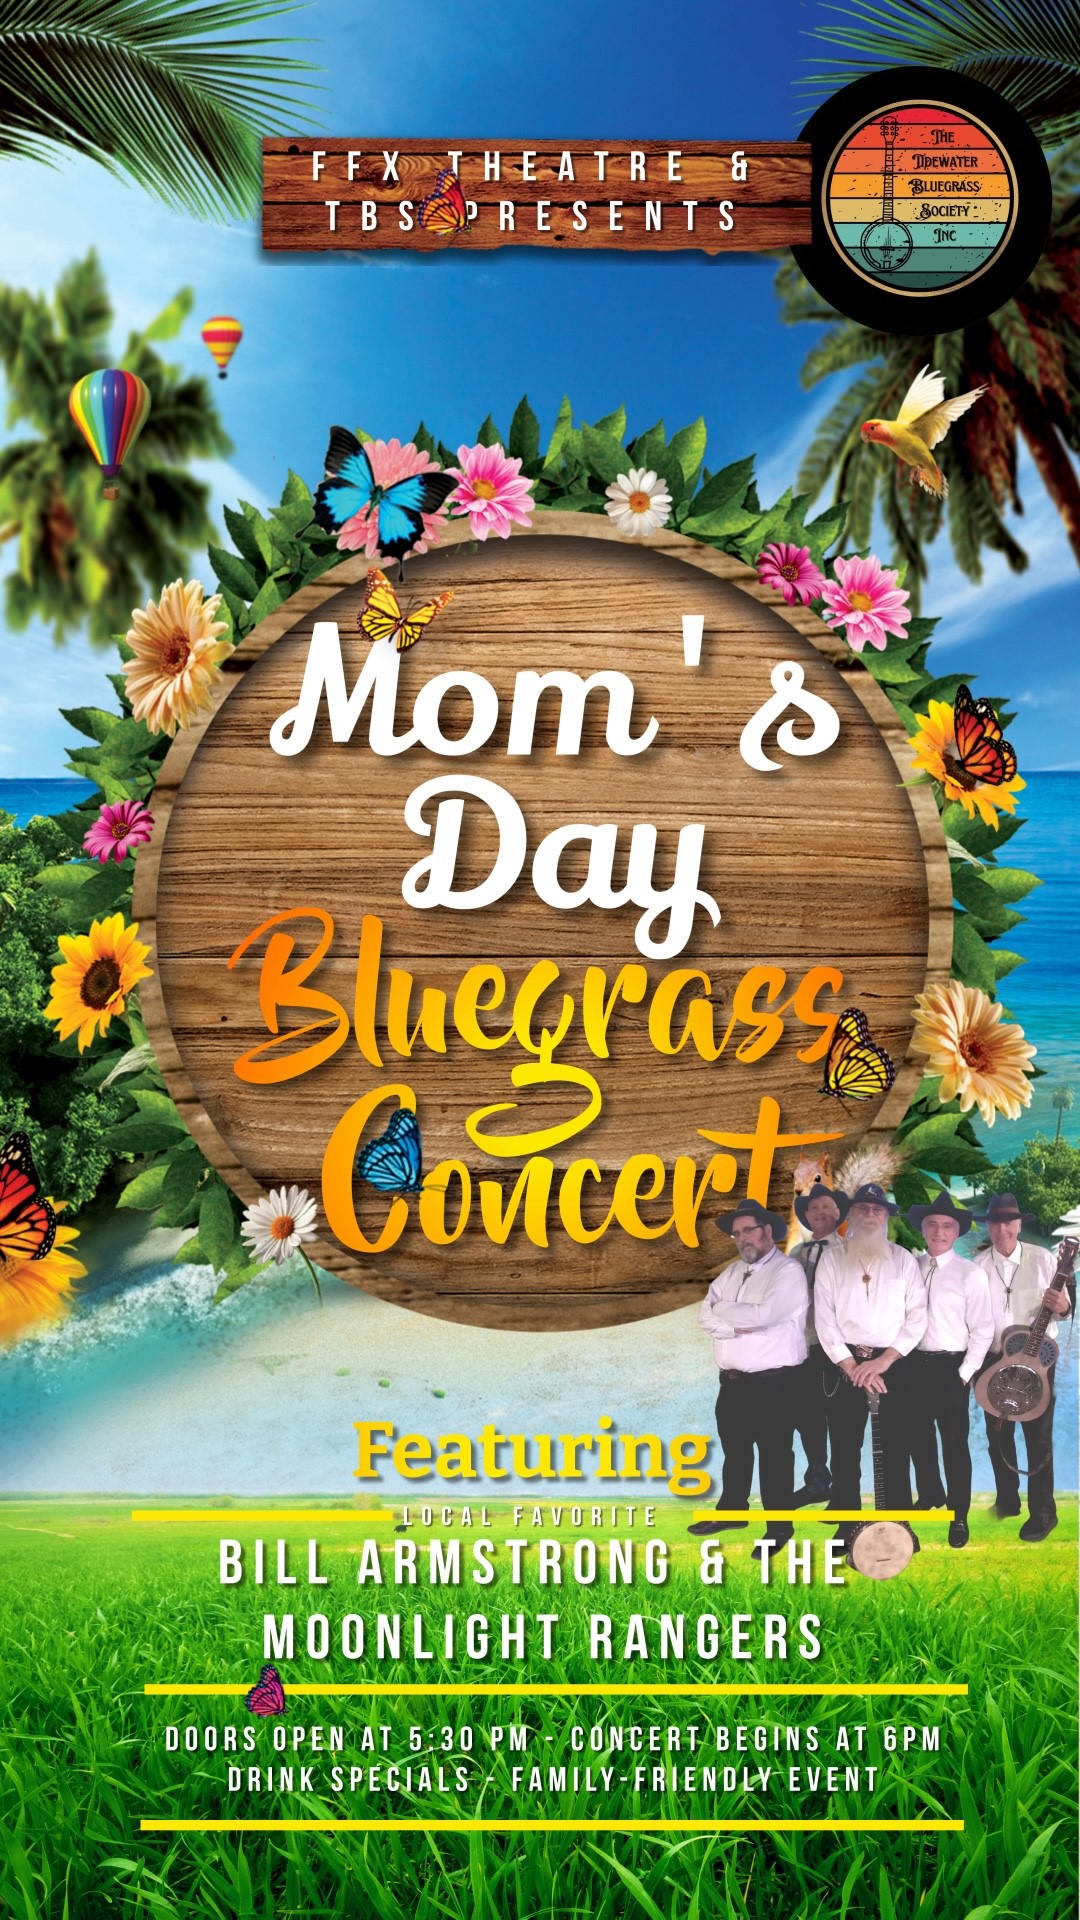 Bluegrass Concert for Mom's Day! FEATURING BILL ARMSTRONG & THE MOONLIGHT RANGERS on May 12, 18:00@FFX Theatre - Buy tickets and Get information on Family Fun Xperience tickets.ffxshow.org